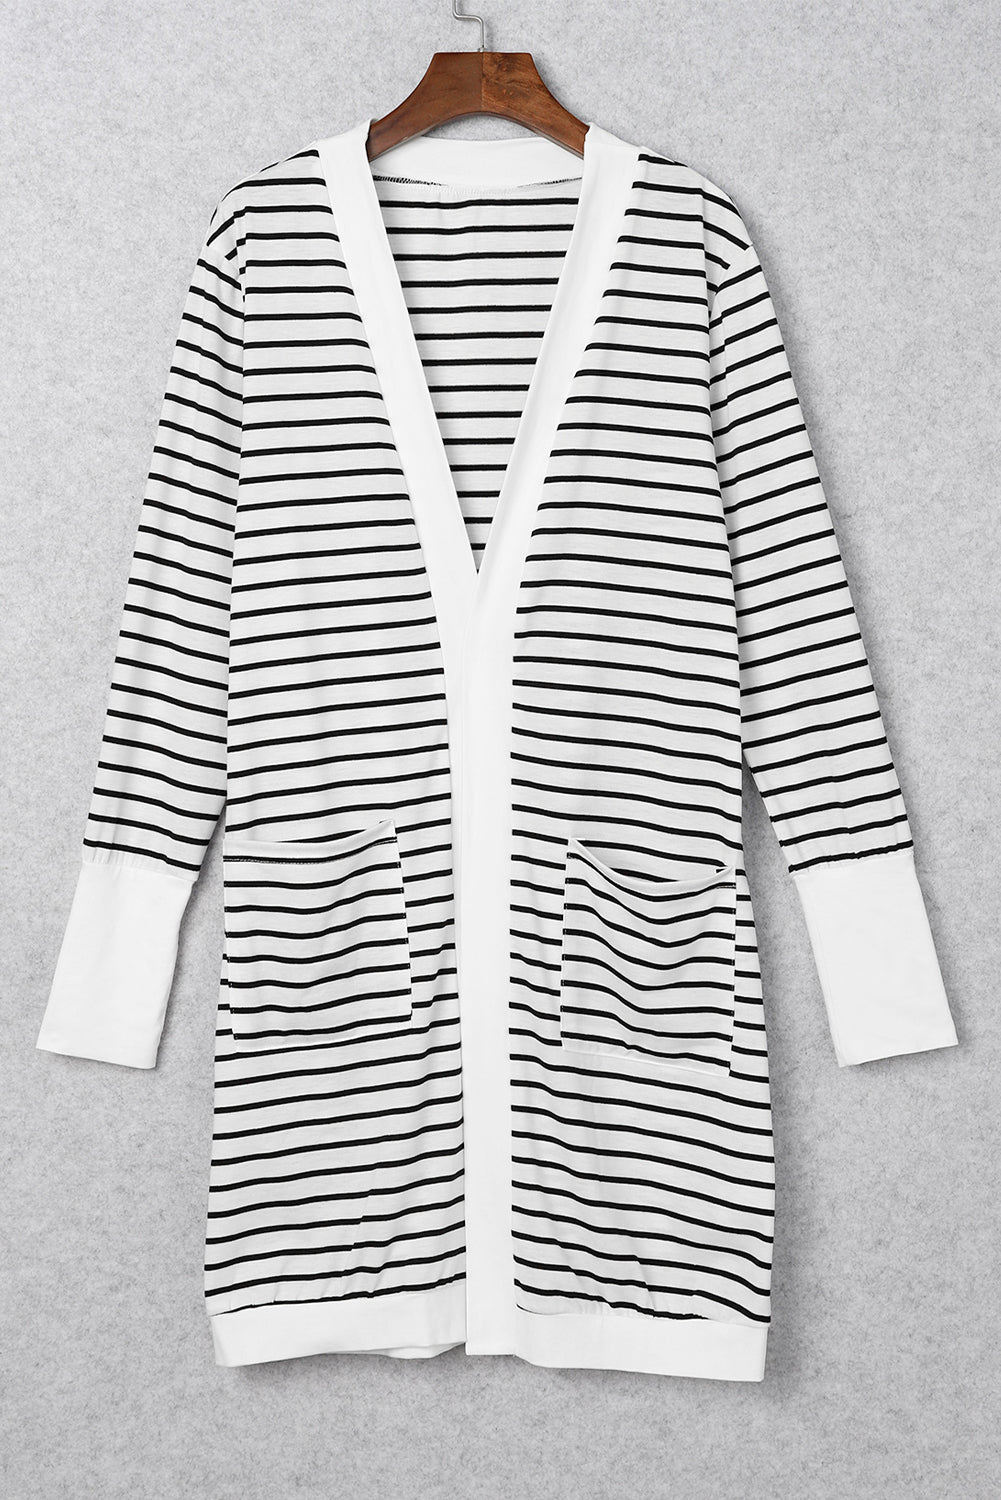 White Striped Side Pockets Open Front Cardigan - SELFTRITSS